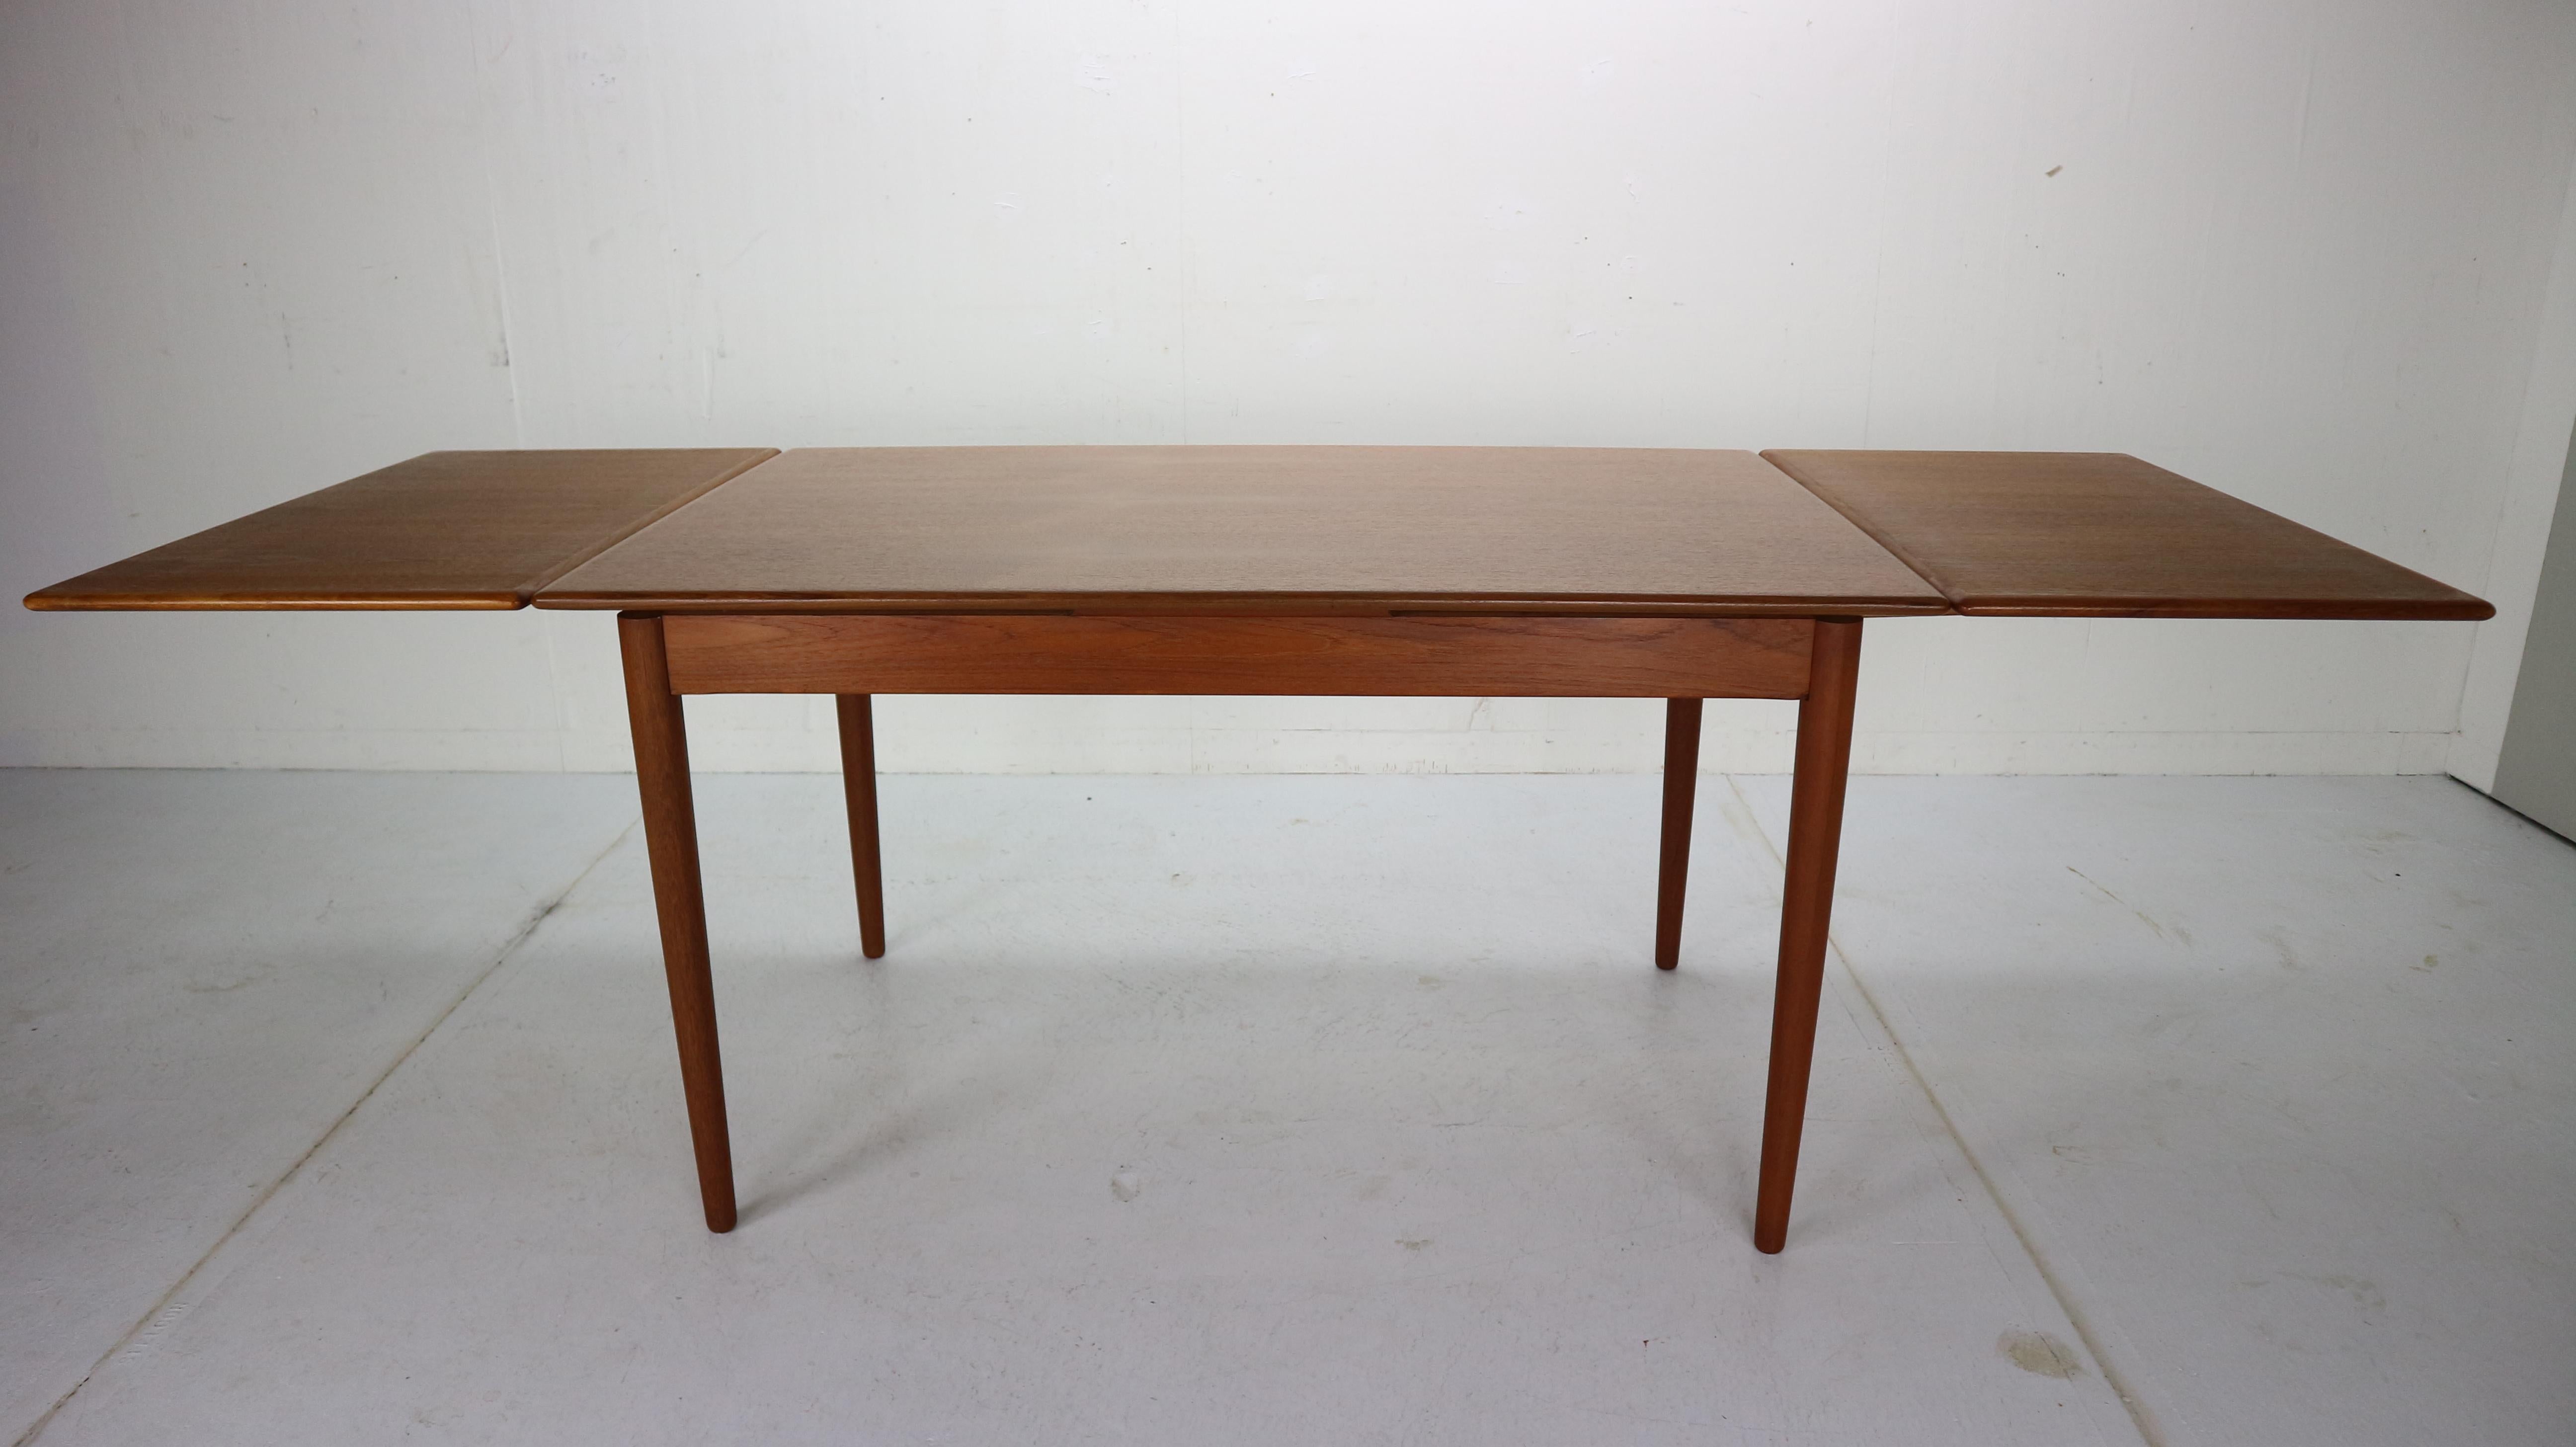 Midcentury period design extendable dining table made from teak wood. Has beautiful wood pattern and elegant legs.
Made in Denmark, 1960s.
Dimensions: 133cm - extendable 237cm.
 